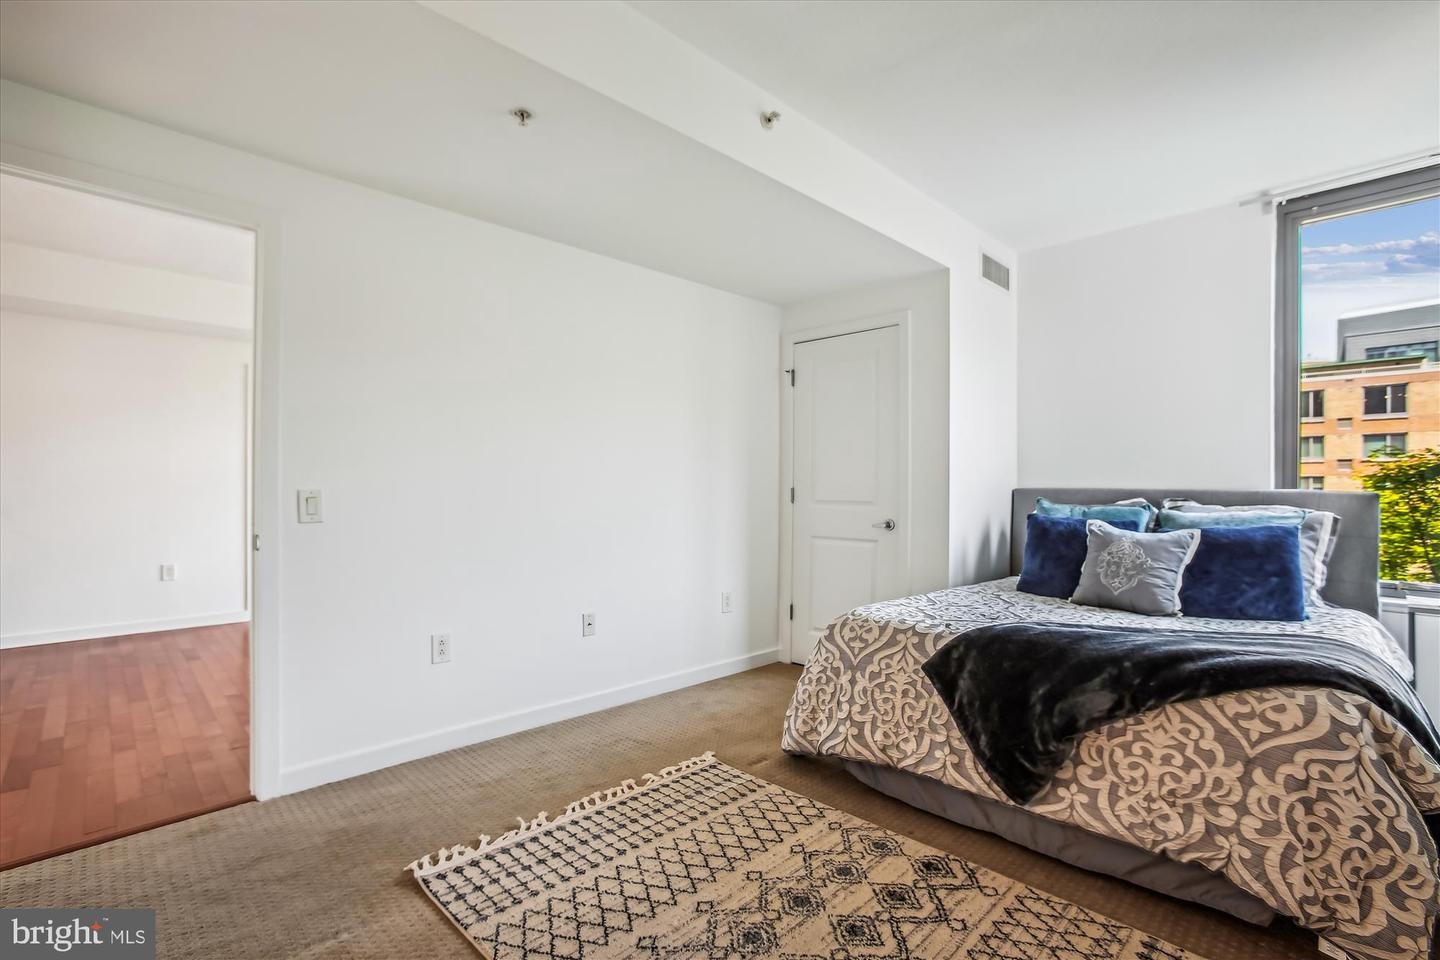 26. 475 K St NW 